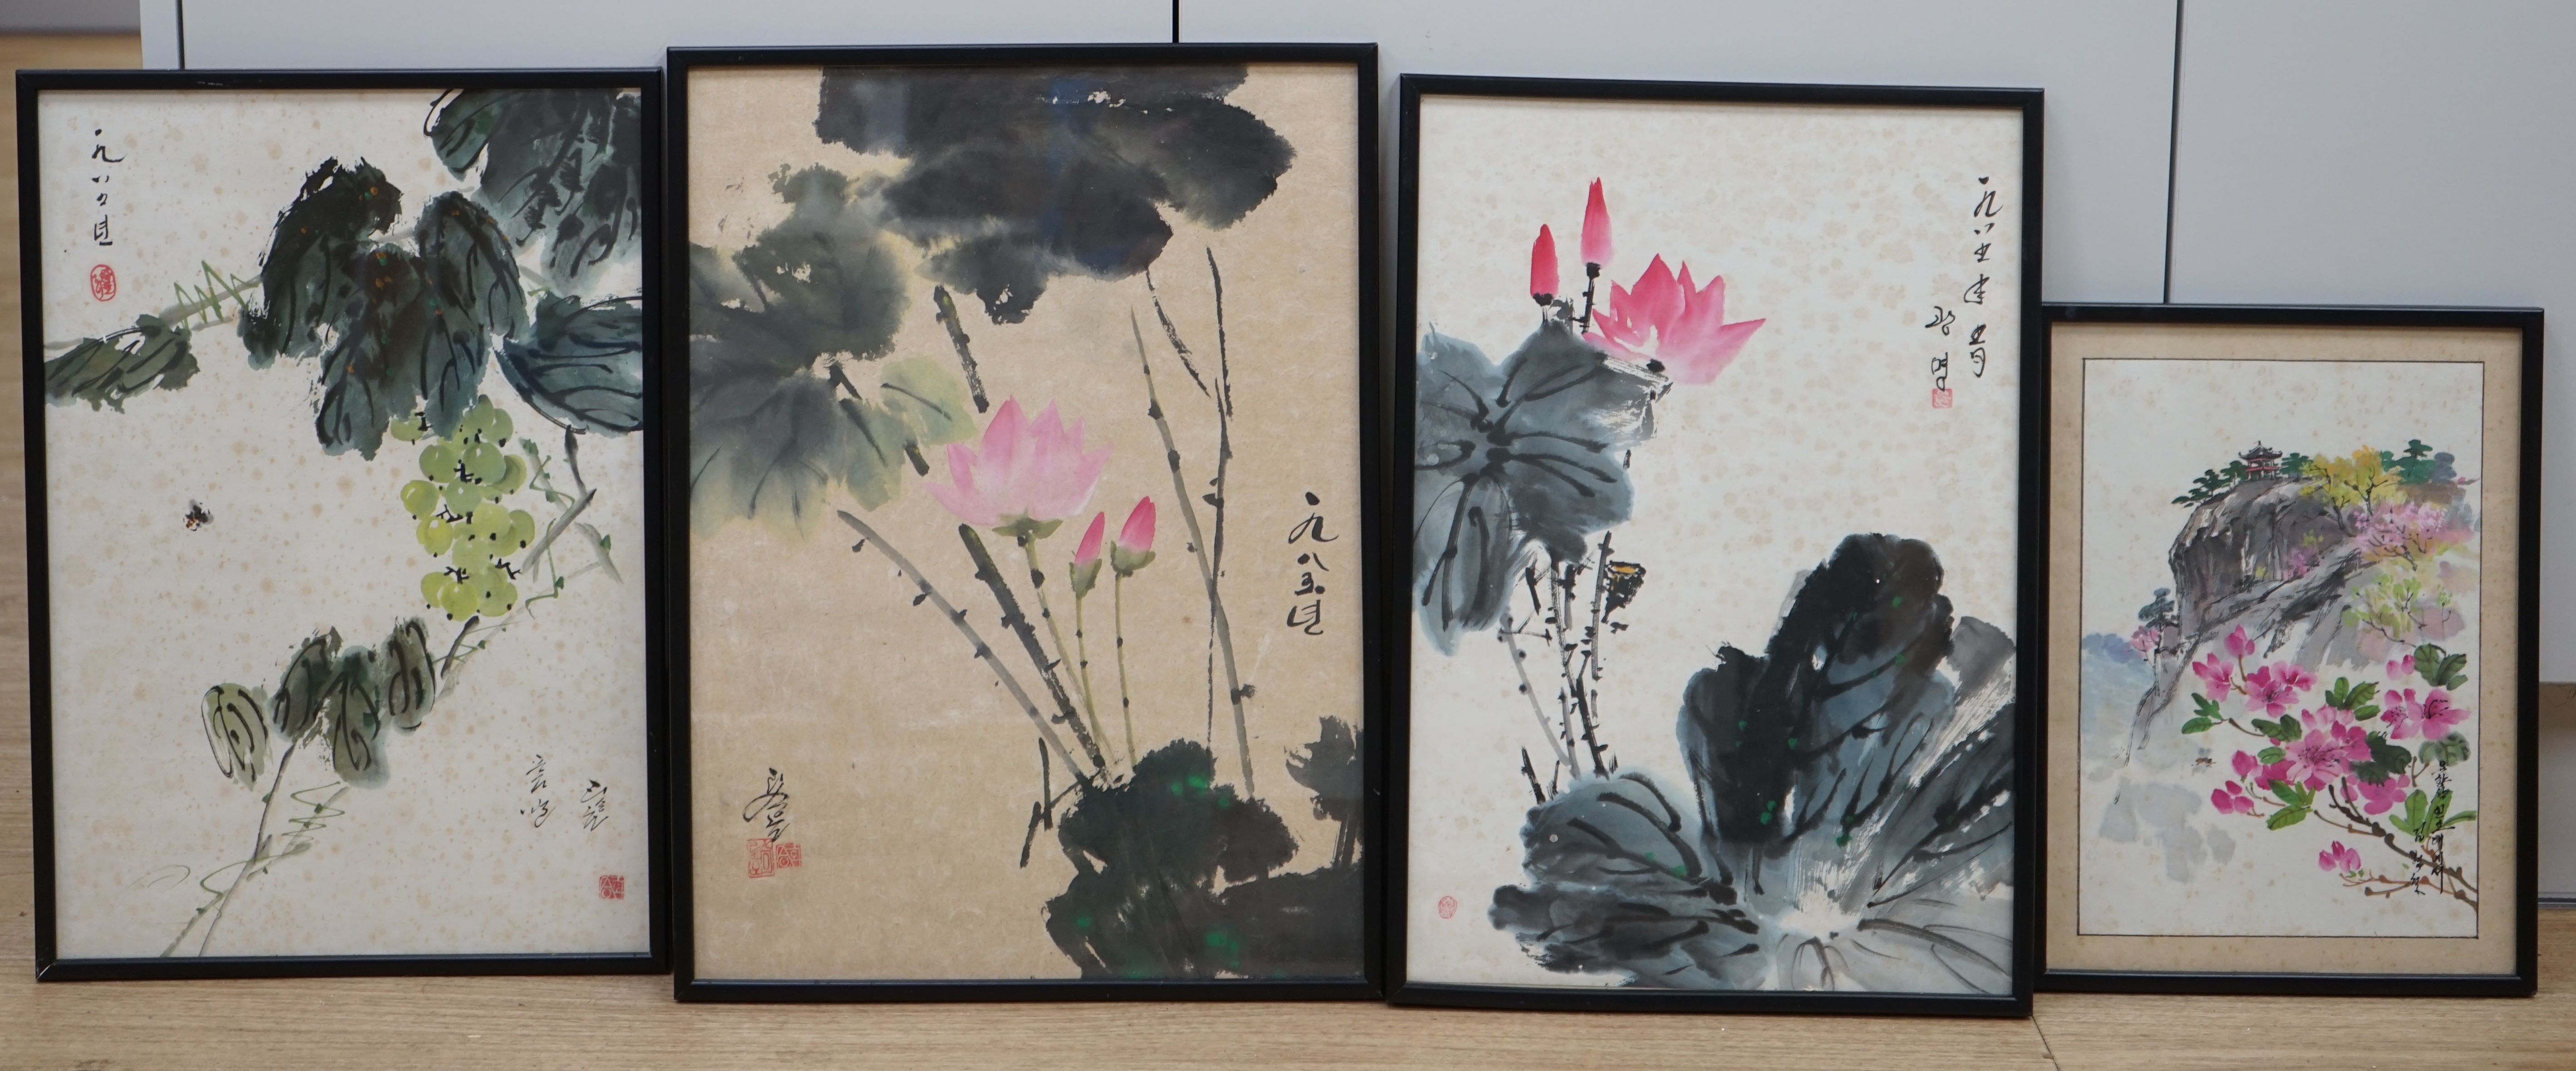 20th century Chinese School, four pictures, Flowers and landscape with pagoda, largest 44 x 29cm. Condition - poor, discolouration and foxing throughout